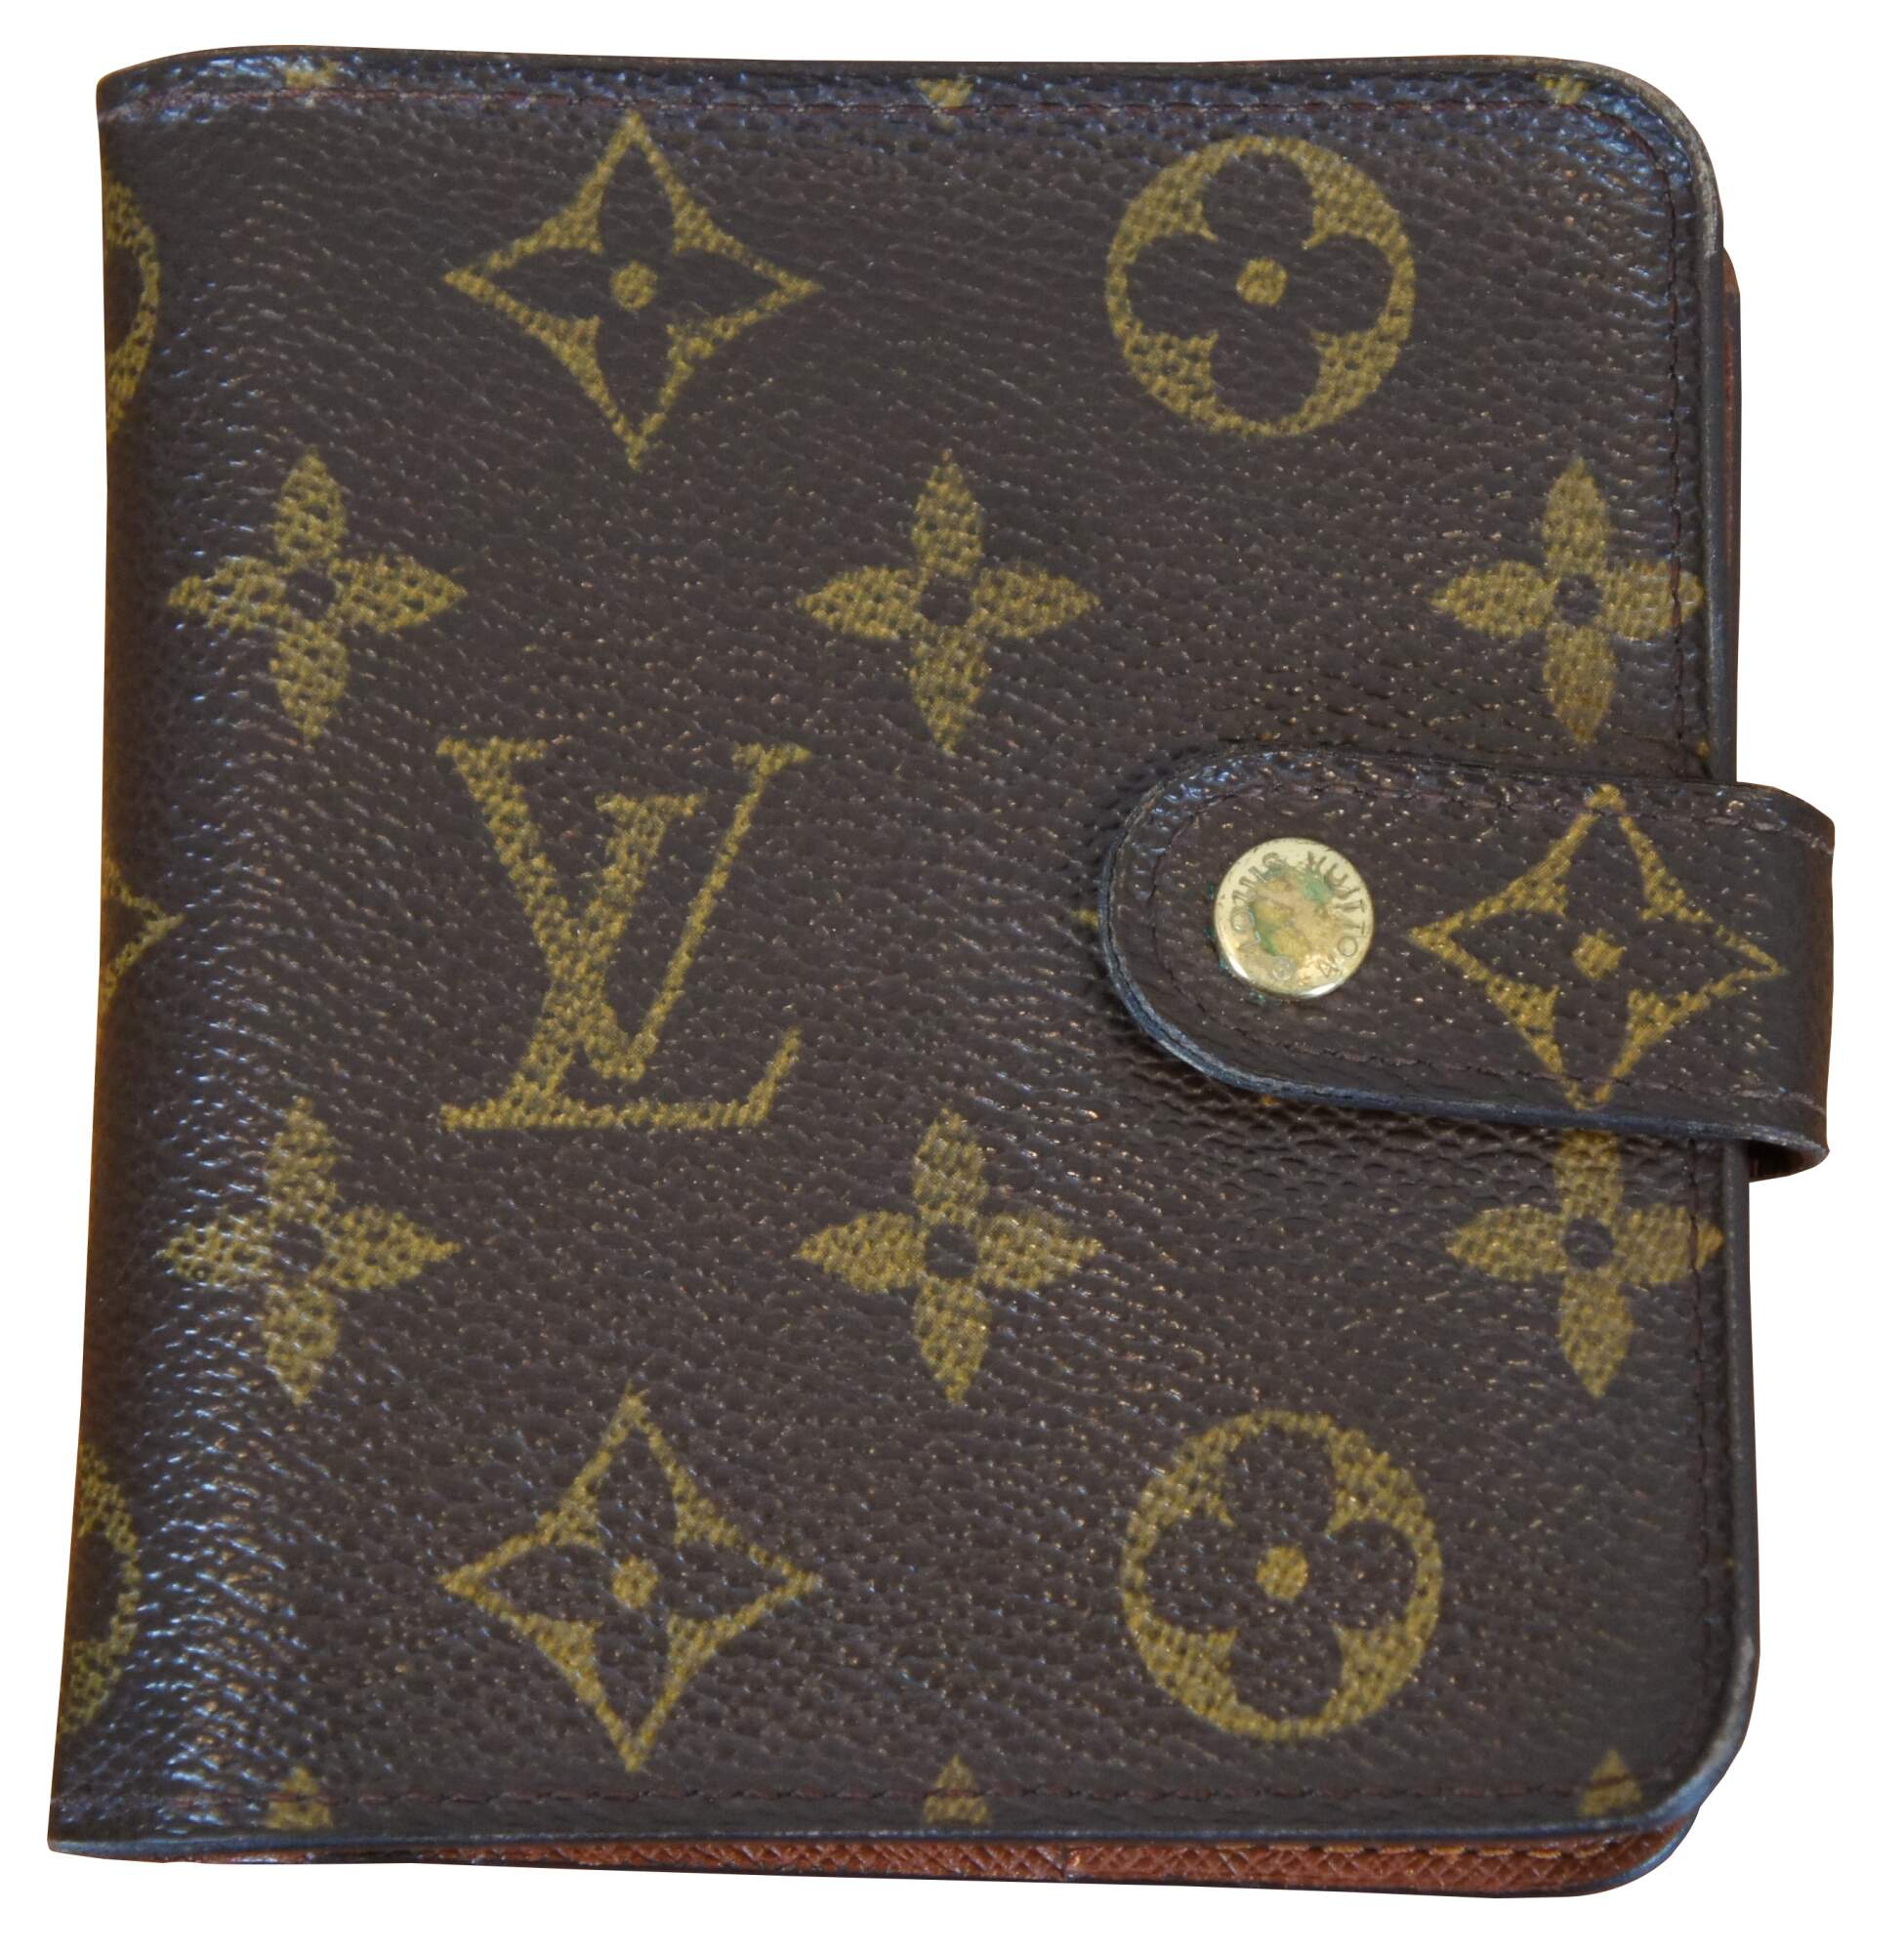 lv card holder with zipper